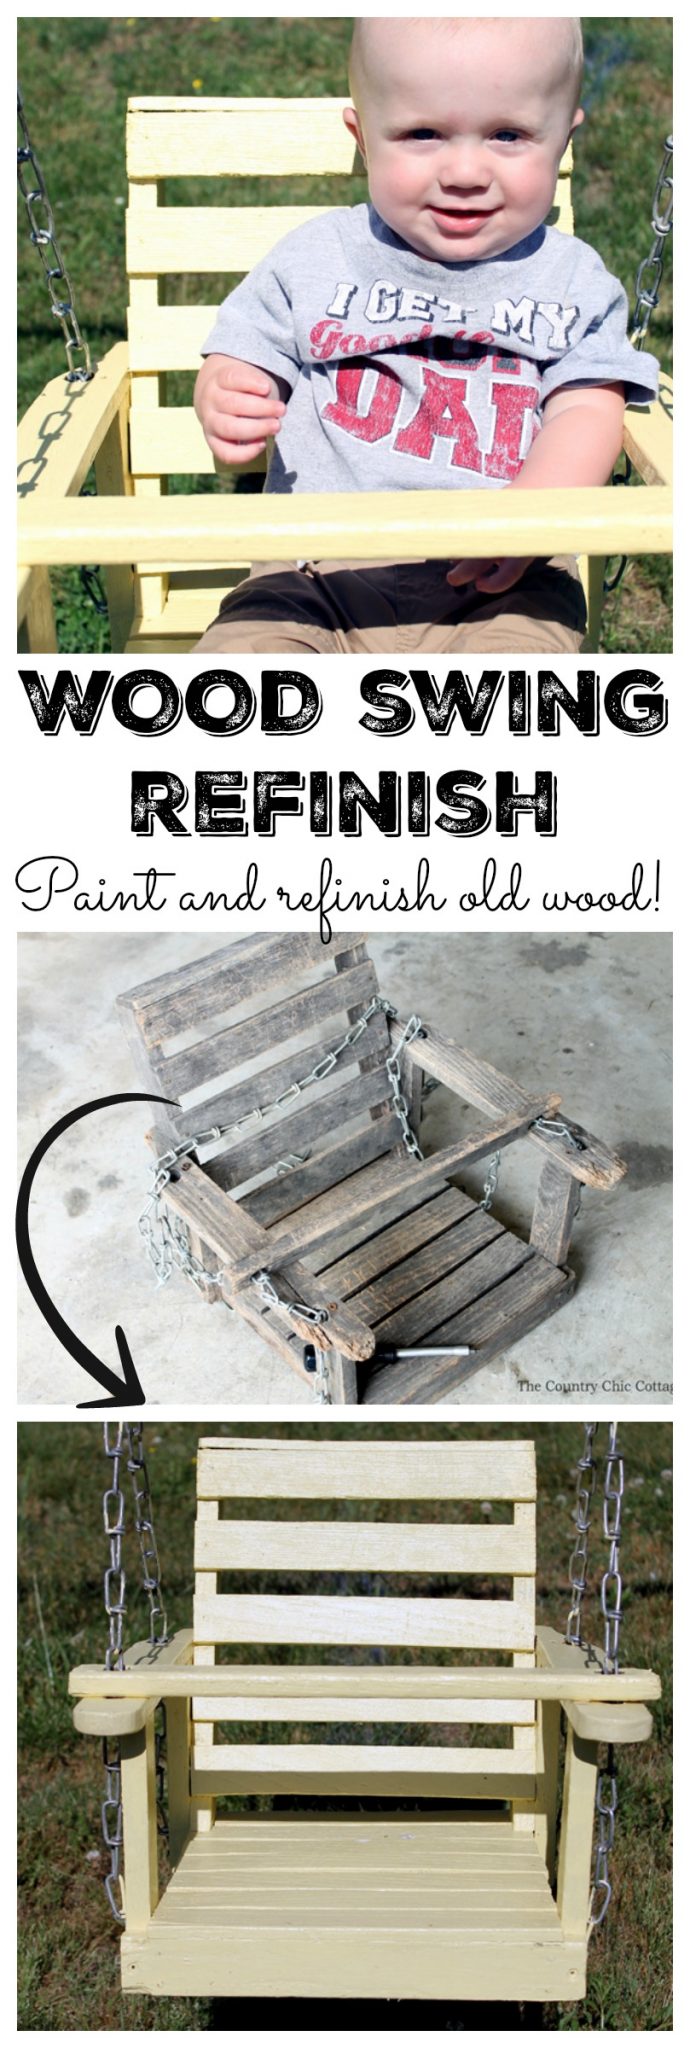 Details on this wood baby swing refinish! You can revitalize an old wooden swing like this as well!